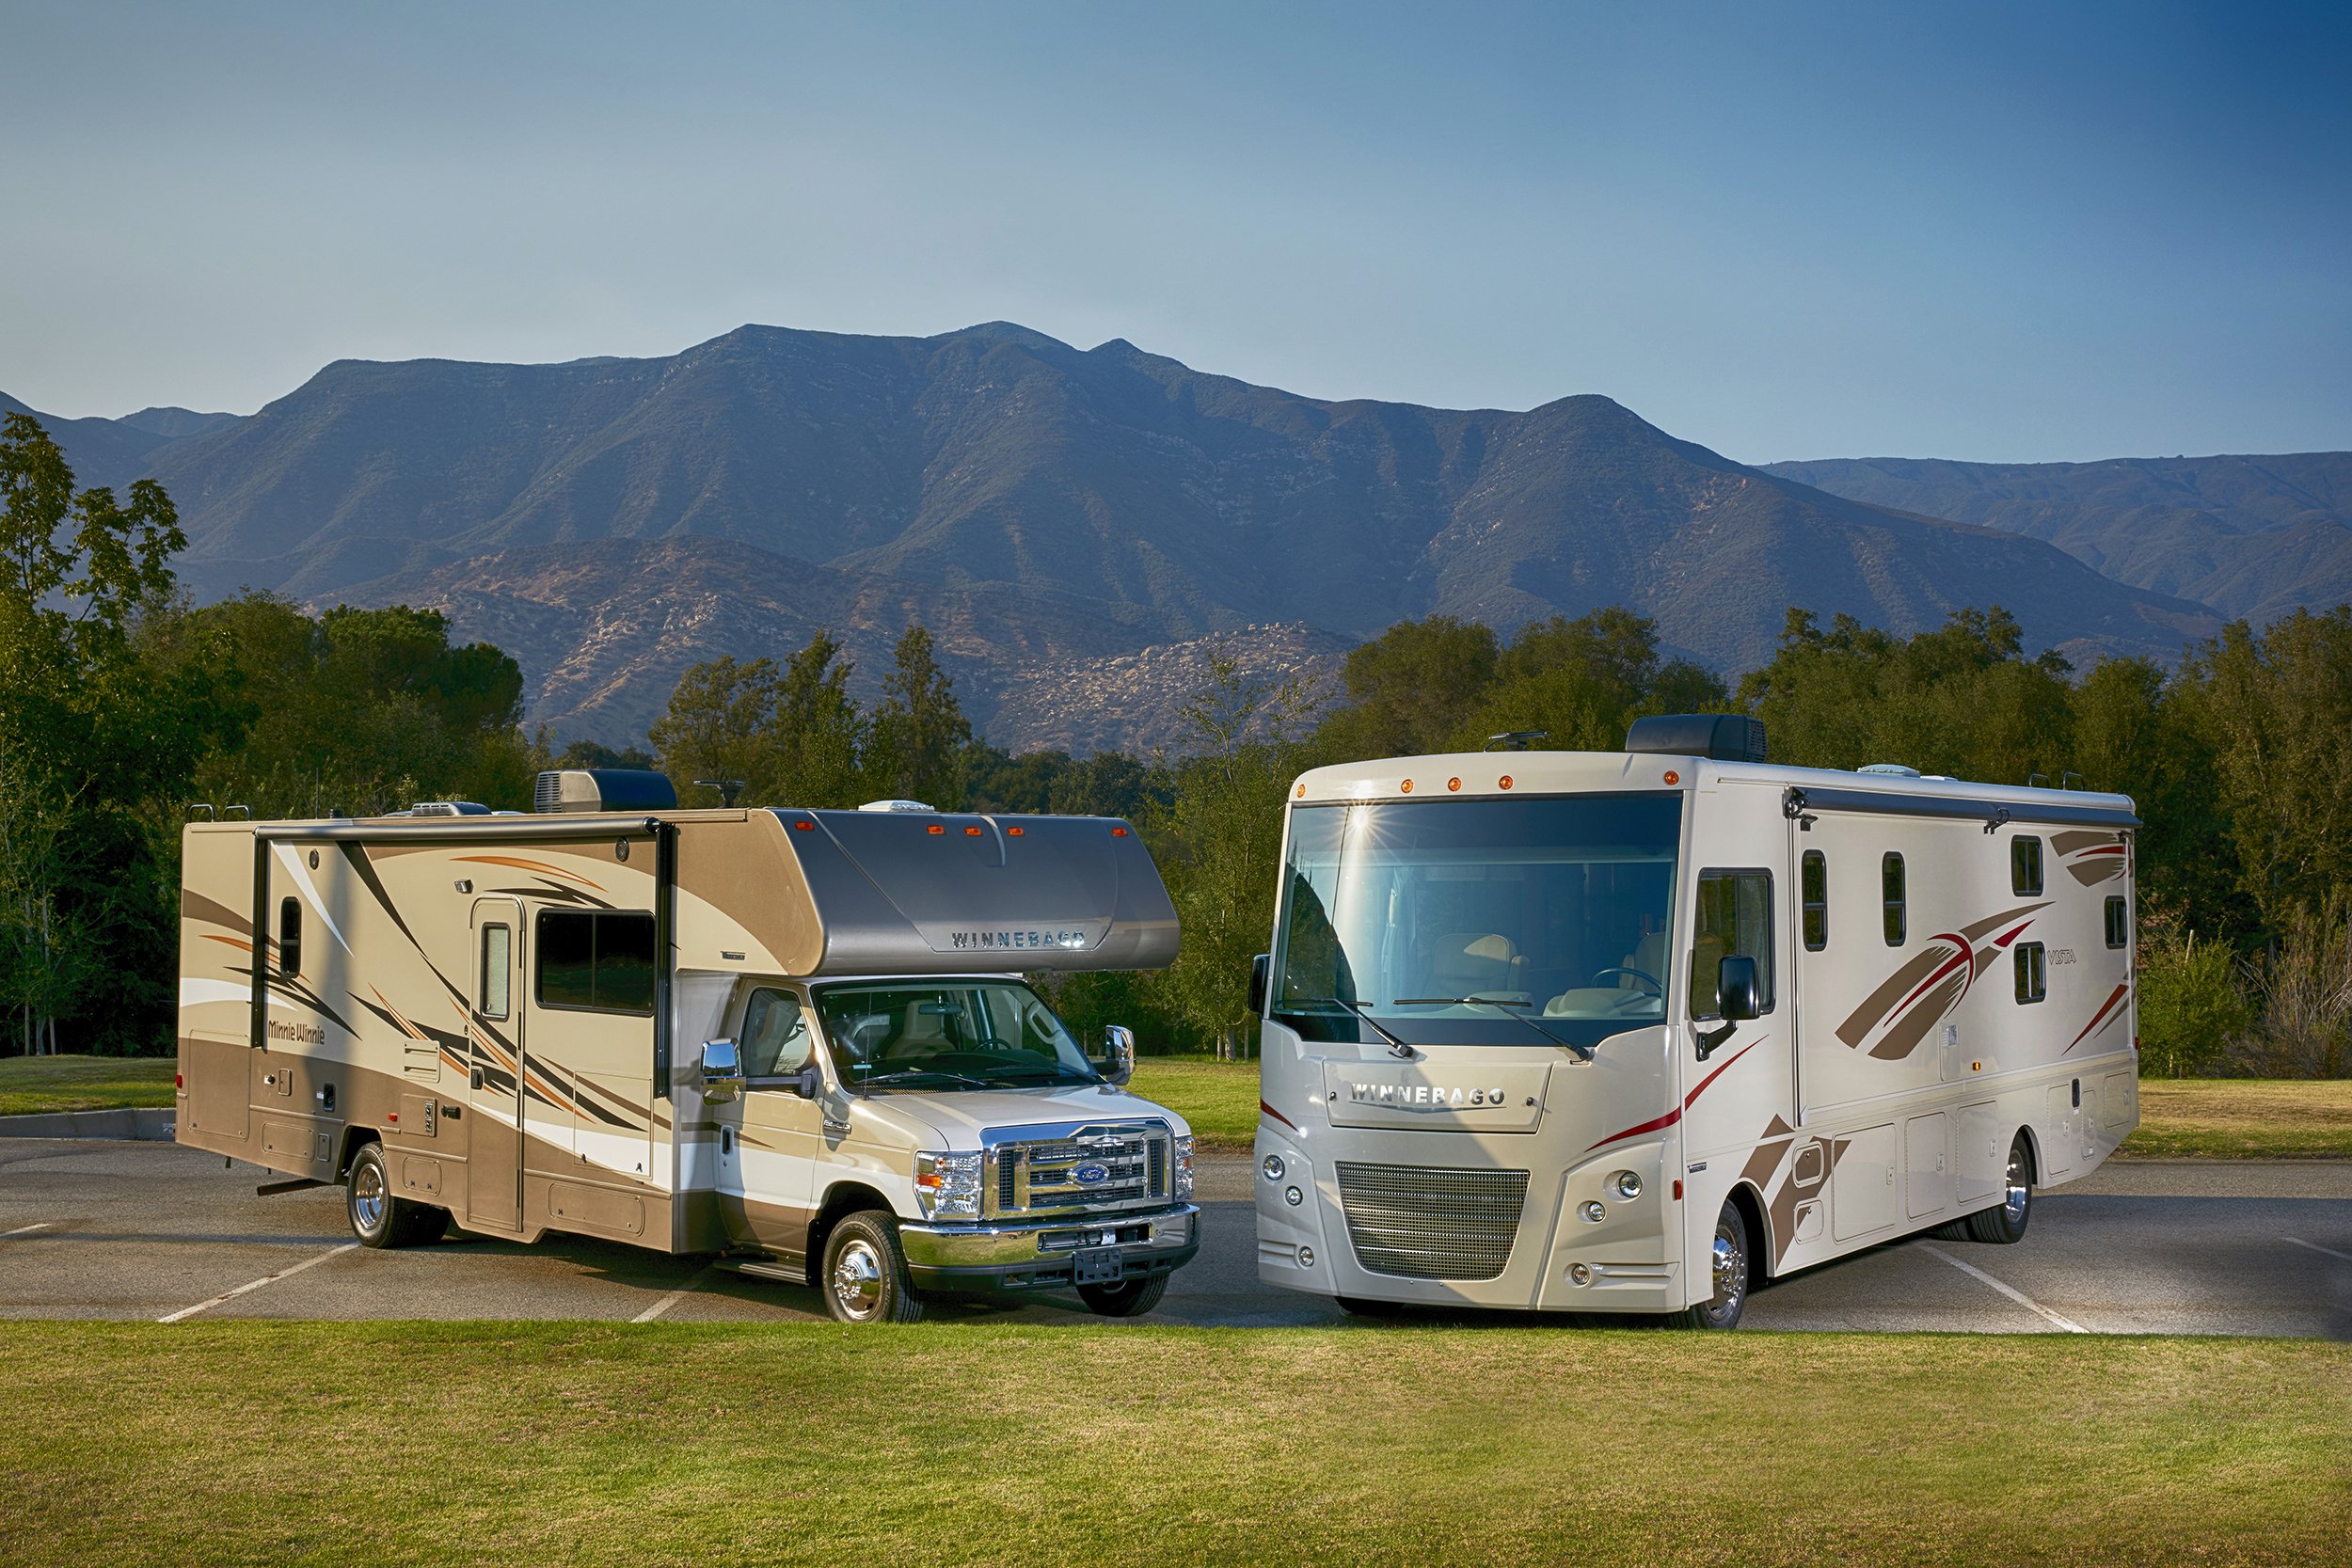 <div class="rich-text"><p>If you're <a href="https://blog.cheapism.com/luxury-recreational-vehicles/">planning to go big</a>, a new Class A motorhome starts — yes, starts — around $40,000 to $200,000, according to Camper Guide; with all the bells and whistles, they can <a href="https://www.roverpass.com/blog/cost-of-buying-an-rv/">push a million bucks</a>. One of the most expensive, the Elemment Palazzo, comes in at a whopping $3 million. Smaller motorhomes won't approach seven figures, but still range from about $40,000 to $100,000. Travel trailers, pop-up campers, and fifth wheels <a href="https://blog.cheapism.com/rv-alternatives/">are more economical</a>, starting around $10,000 to $15,000 and topping out around $50,000.</p><p><b>Savings Tip</b>: Joining an RV membership club can save you on camping fees, RV accessories, and even gas. Check out Good Sam Club for <a href="https://click.linksynergy.com/deeplink?id=u9wLU8EIJRU&mid=39221&murl=https%3A%2F%2Fwww.goodsamroadside.com" rel="sponsored nofollow">RV discounts and roadside assistance.</a></p></div>